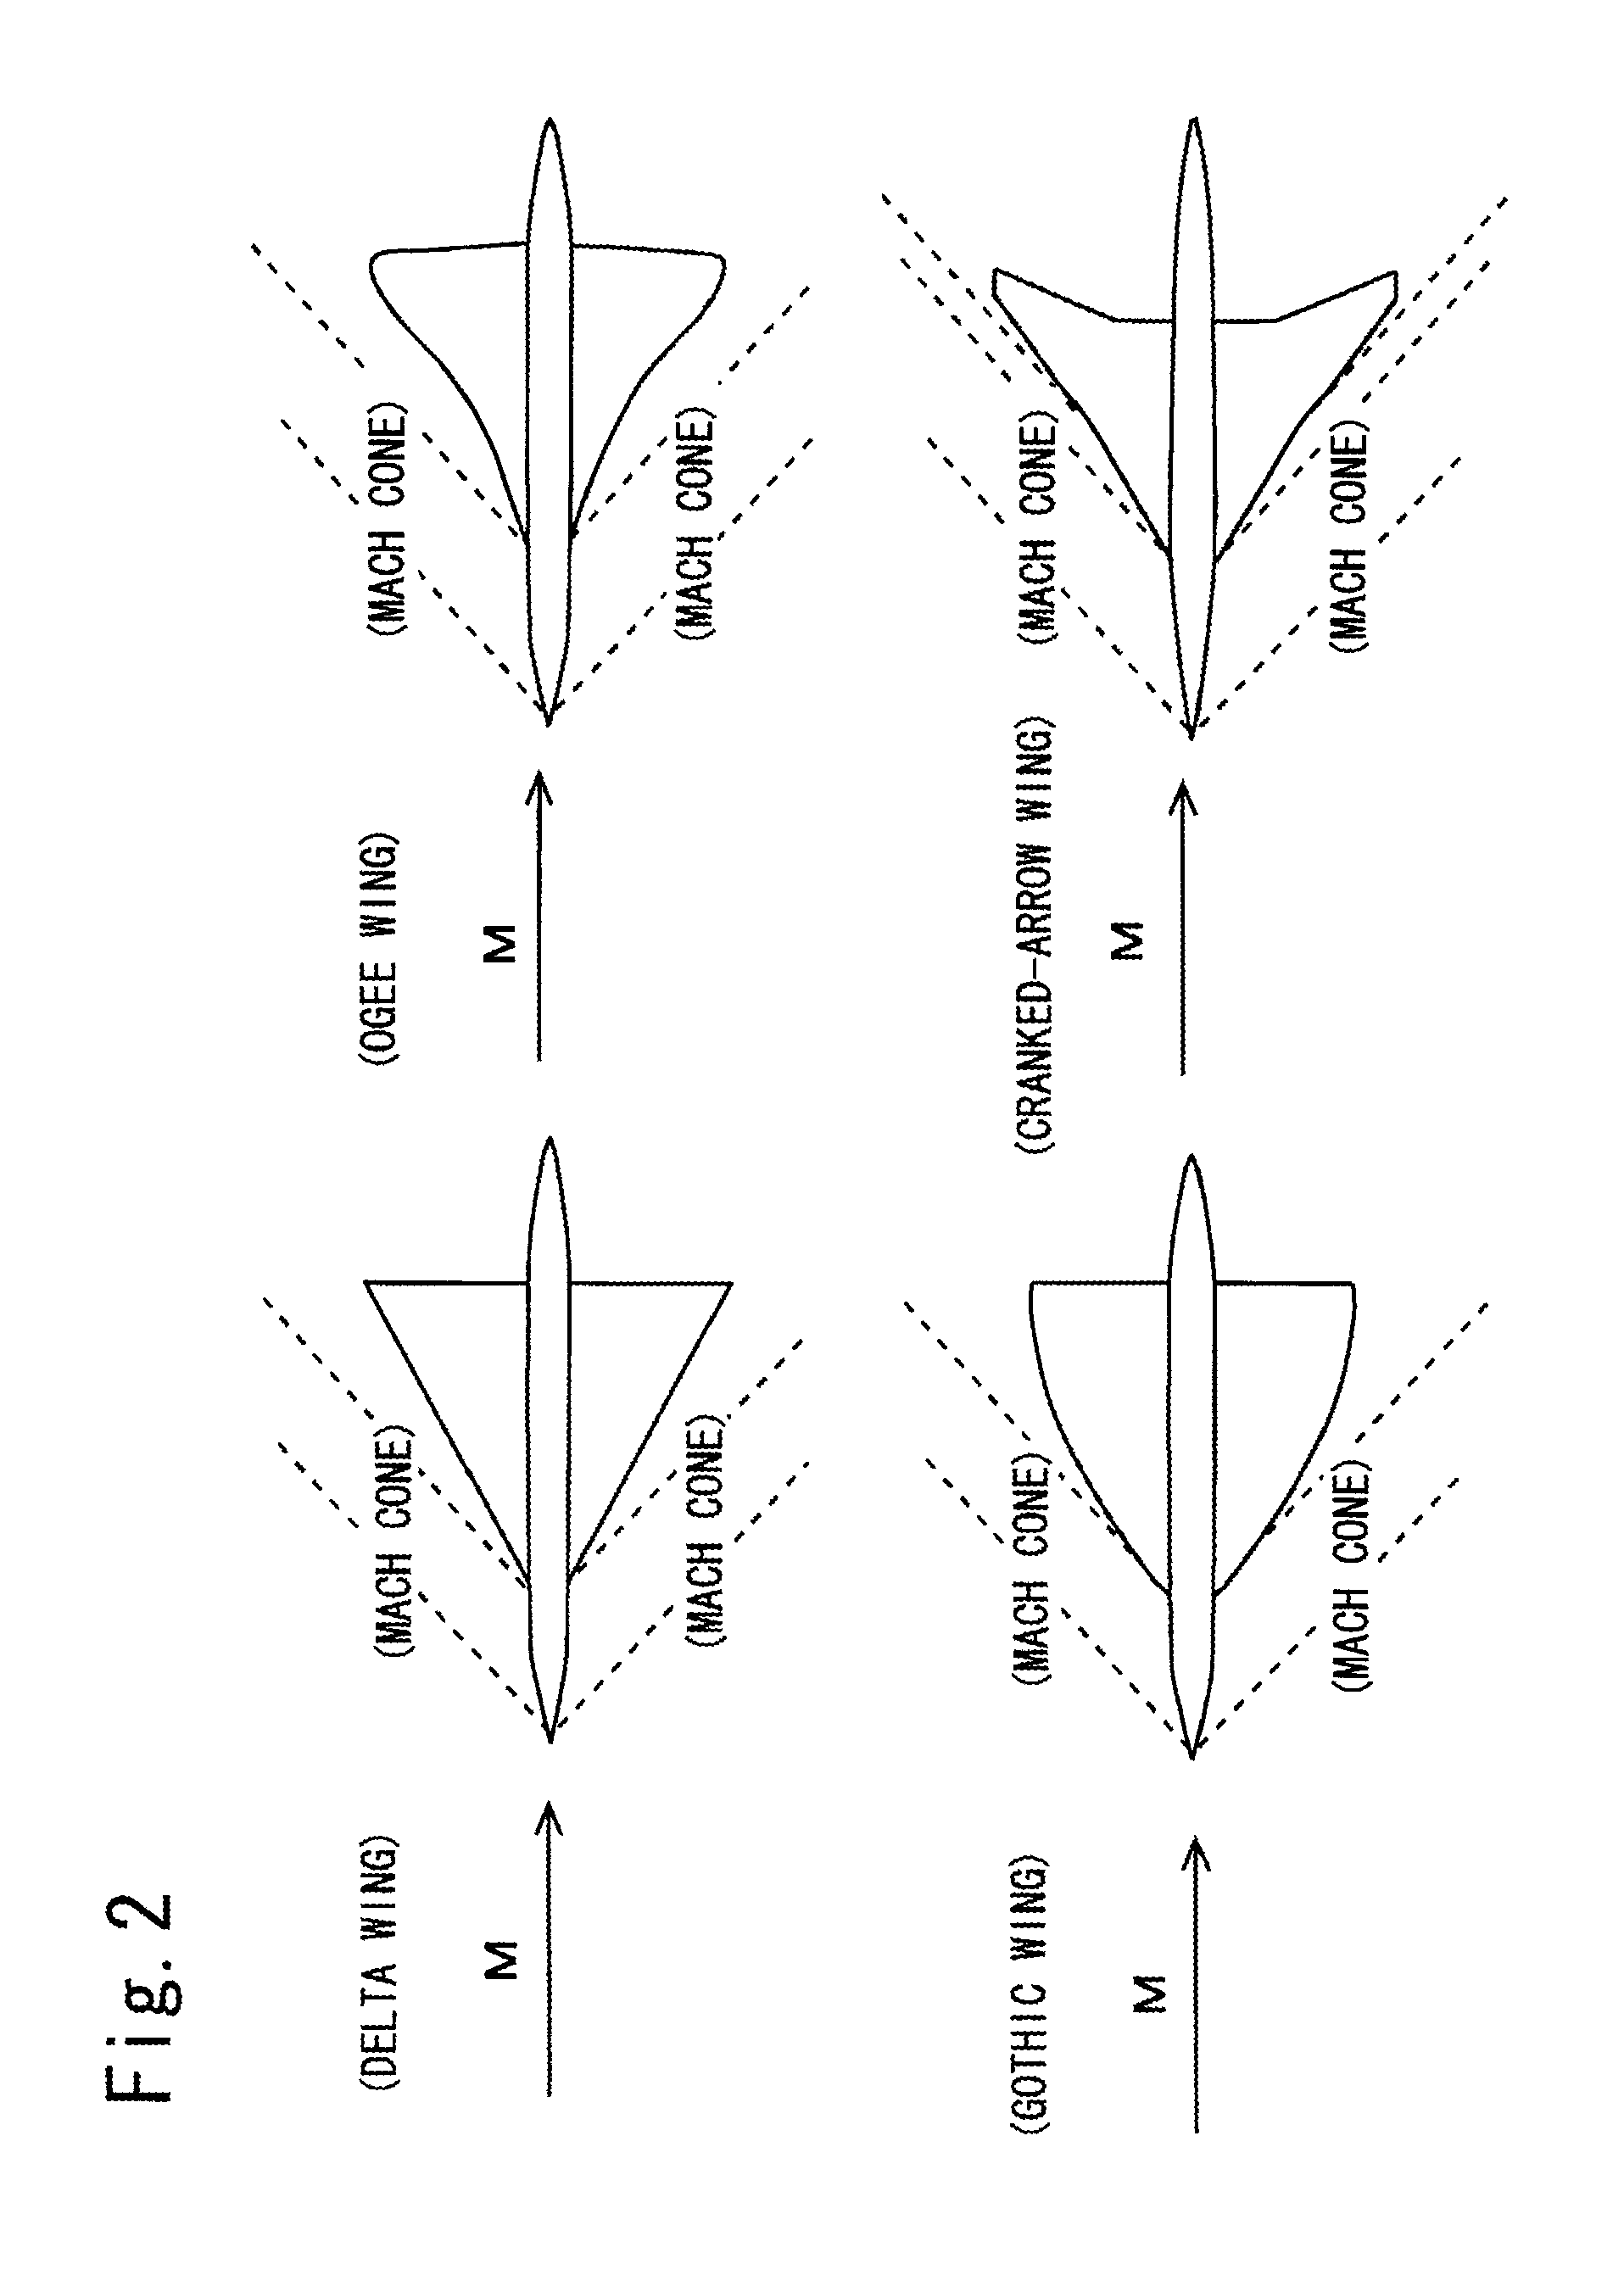 Method of designing natural laminar flow wing for reynolds numbers equivalent to actual supersonic aircraft